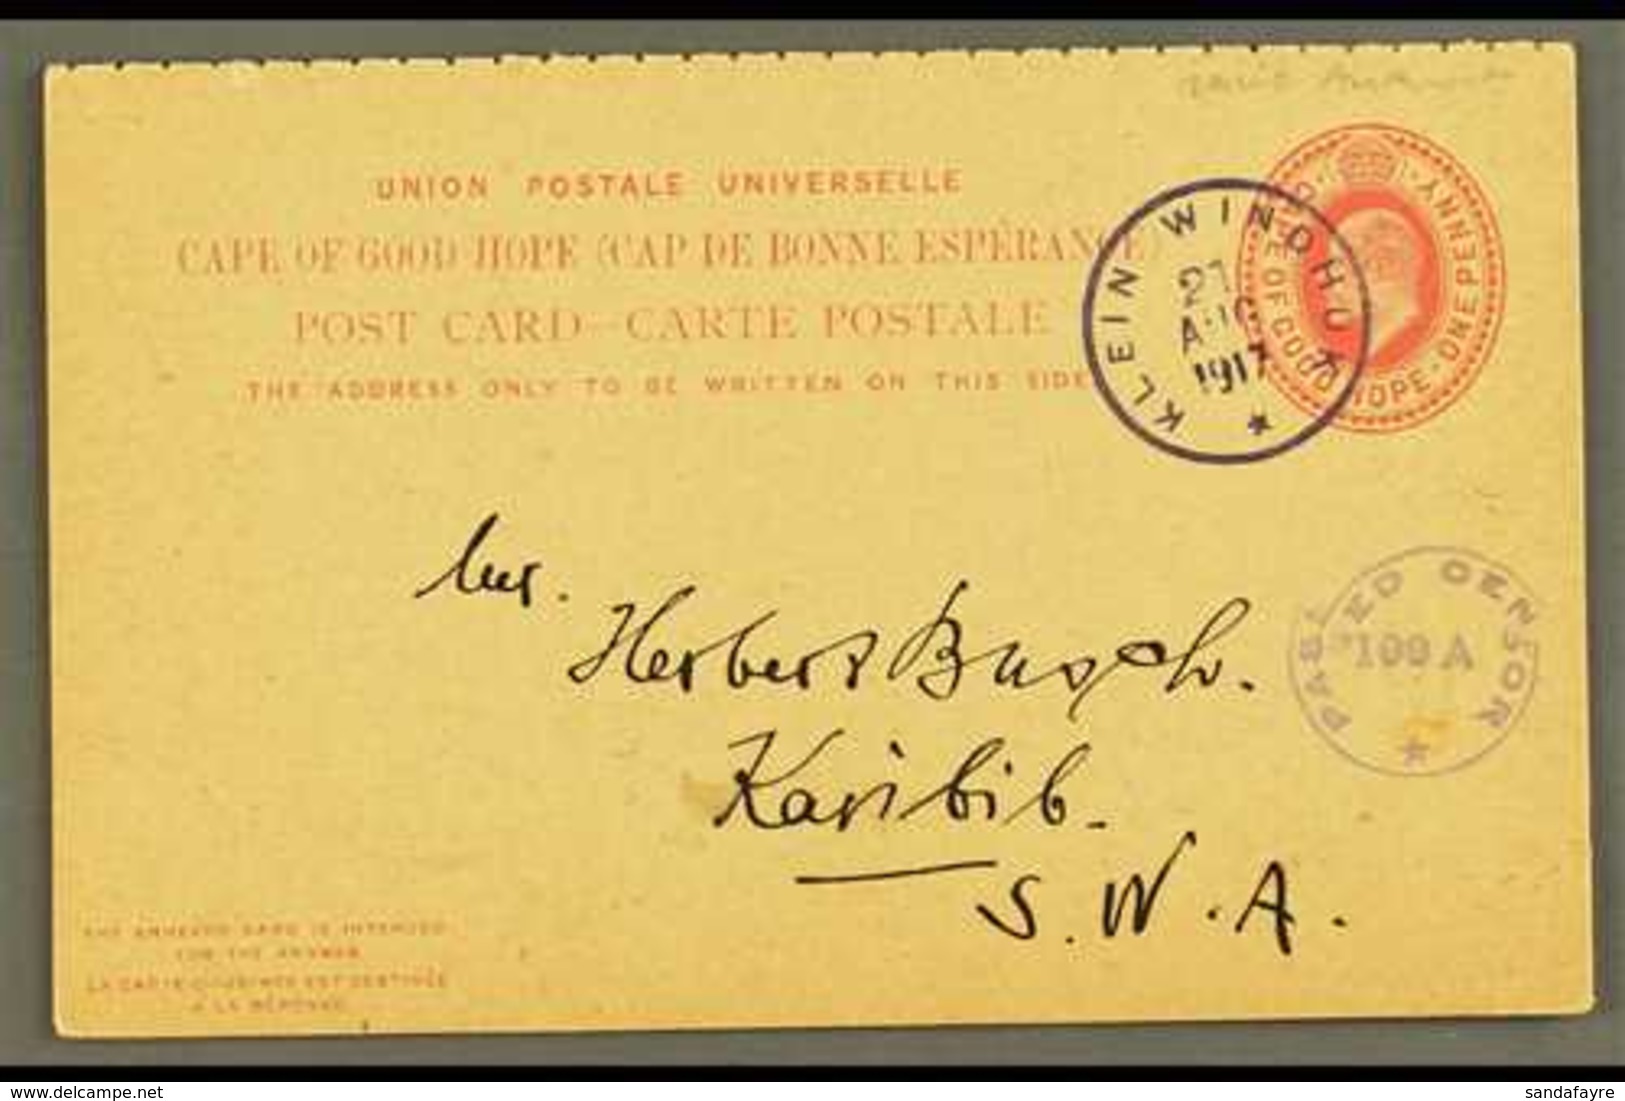 1917  (21 Aug) 1d + 1d KEVII Cape Complete Reply Card To Karibib Cancelled By Superb "KLEIN WINDHUK" Rubber Cds Pmk In D - Afrique Du Sud-Ouest (1923-1990)